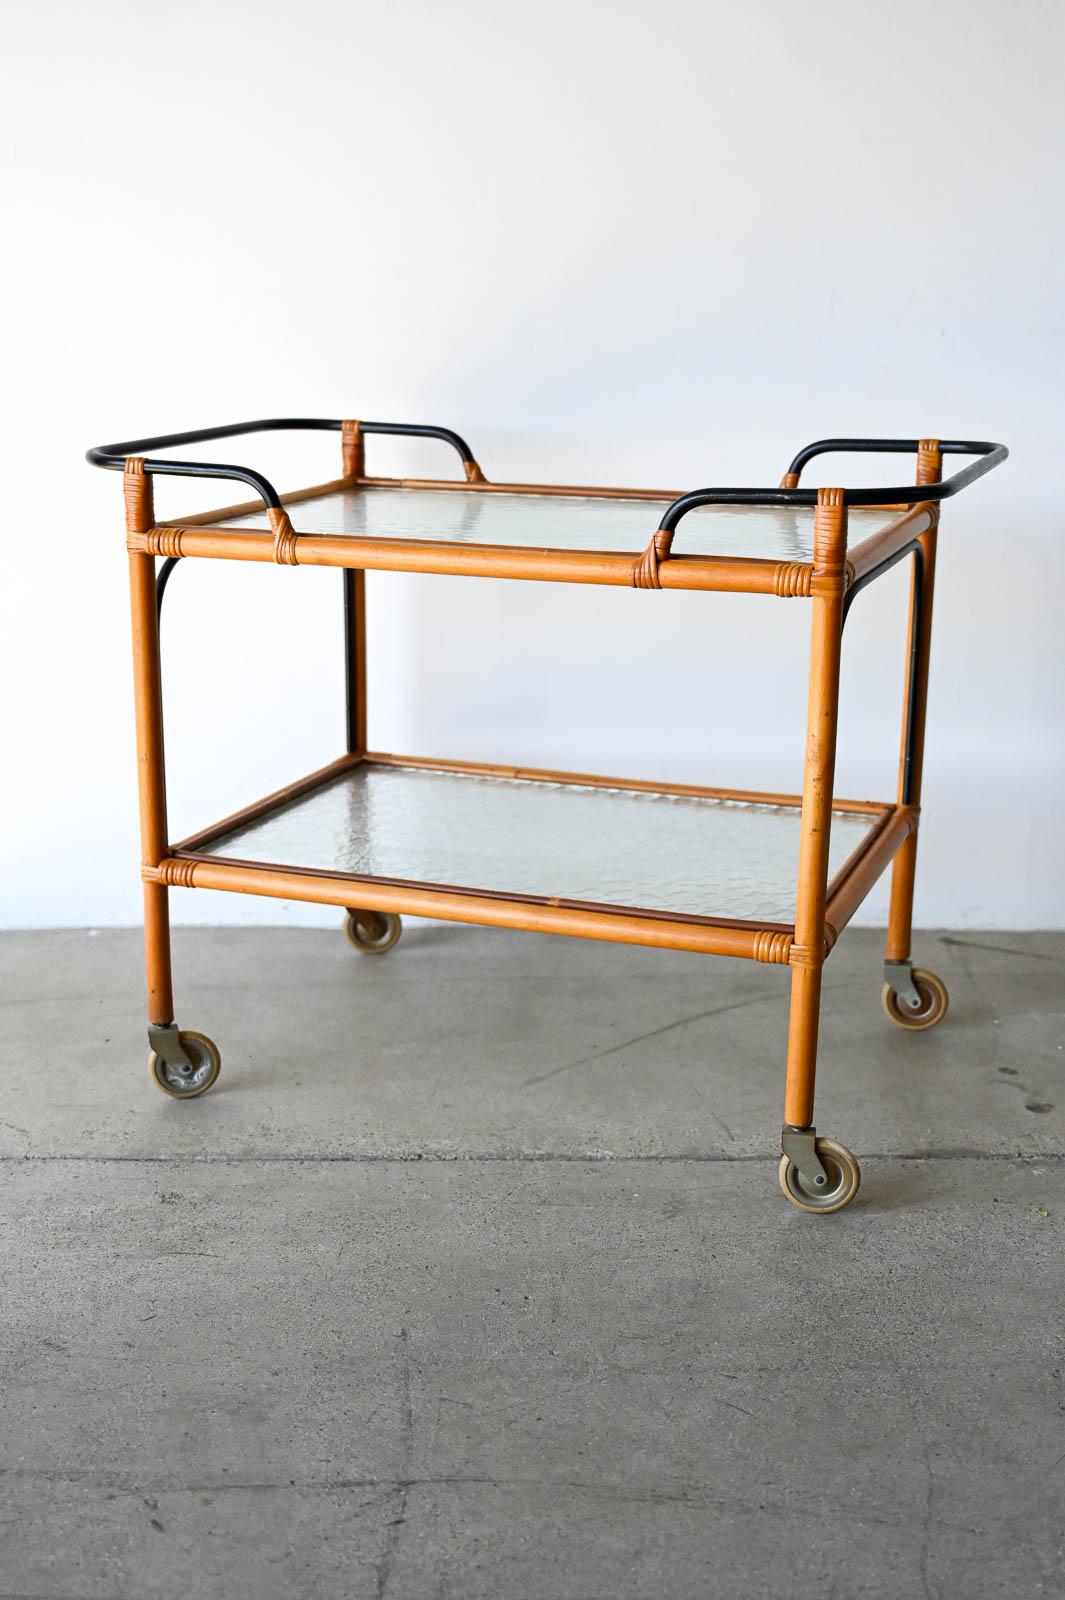 Adrian Audoux and Frida Minet Bamboo Iron and Glass Bar Trolley, ca. 1950.  Great rolling bar cart or trolley by French designers Audoux and Minet.  Split bamboo frame with original textured glass and iron handles.  Wonderful simple design with